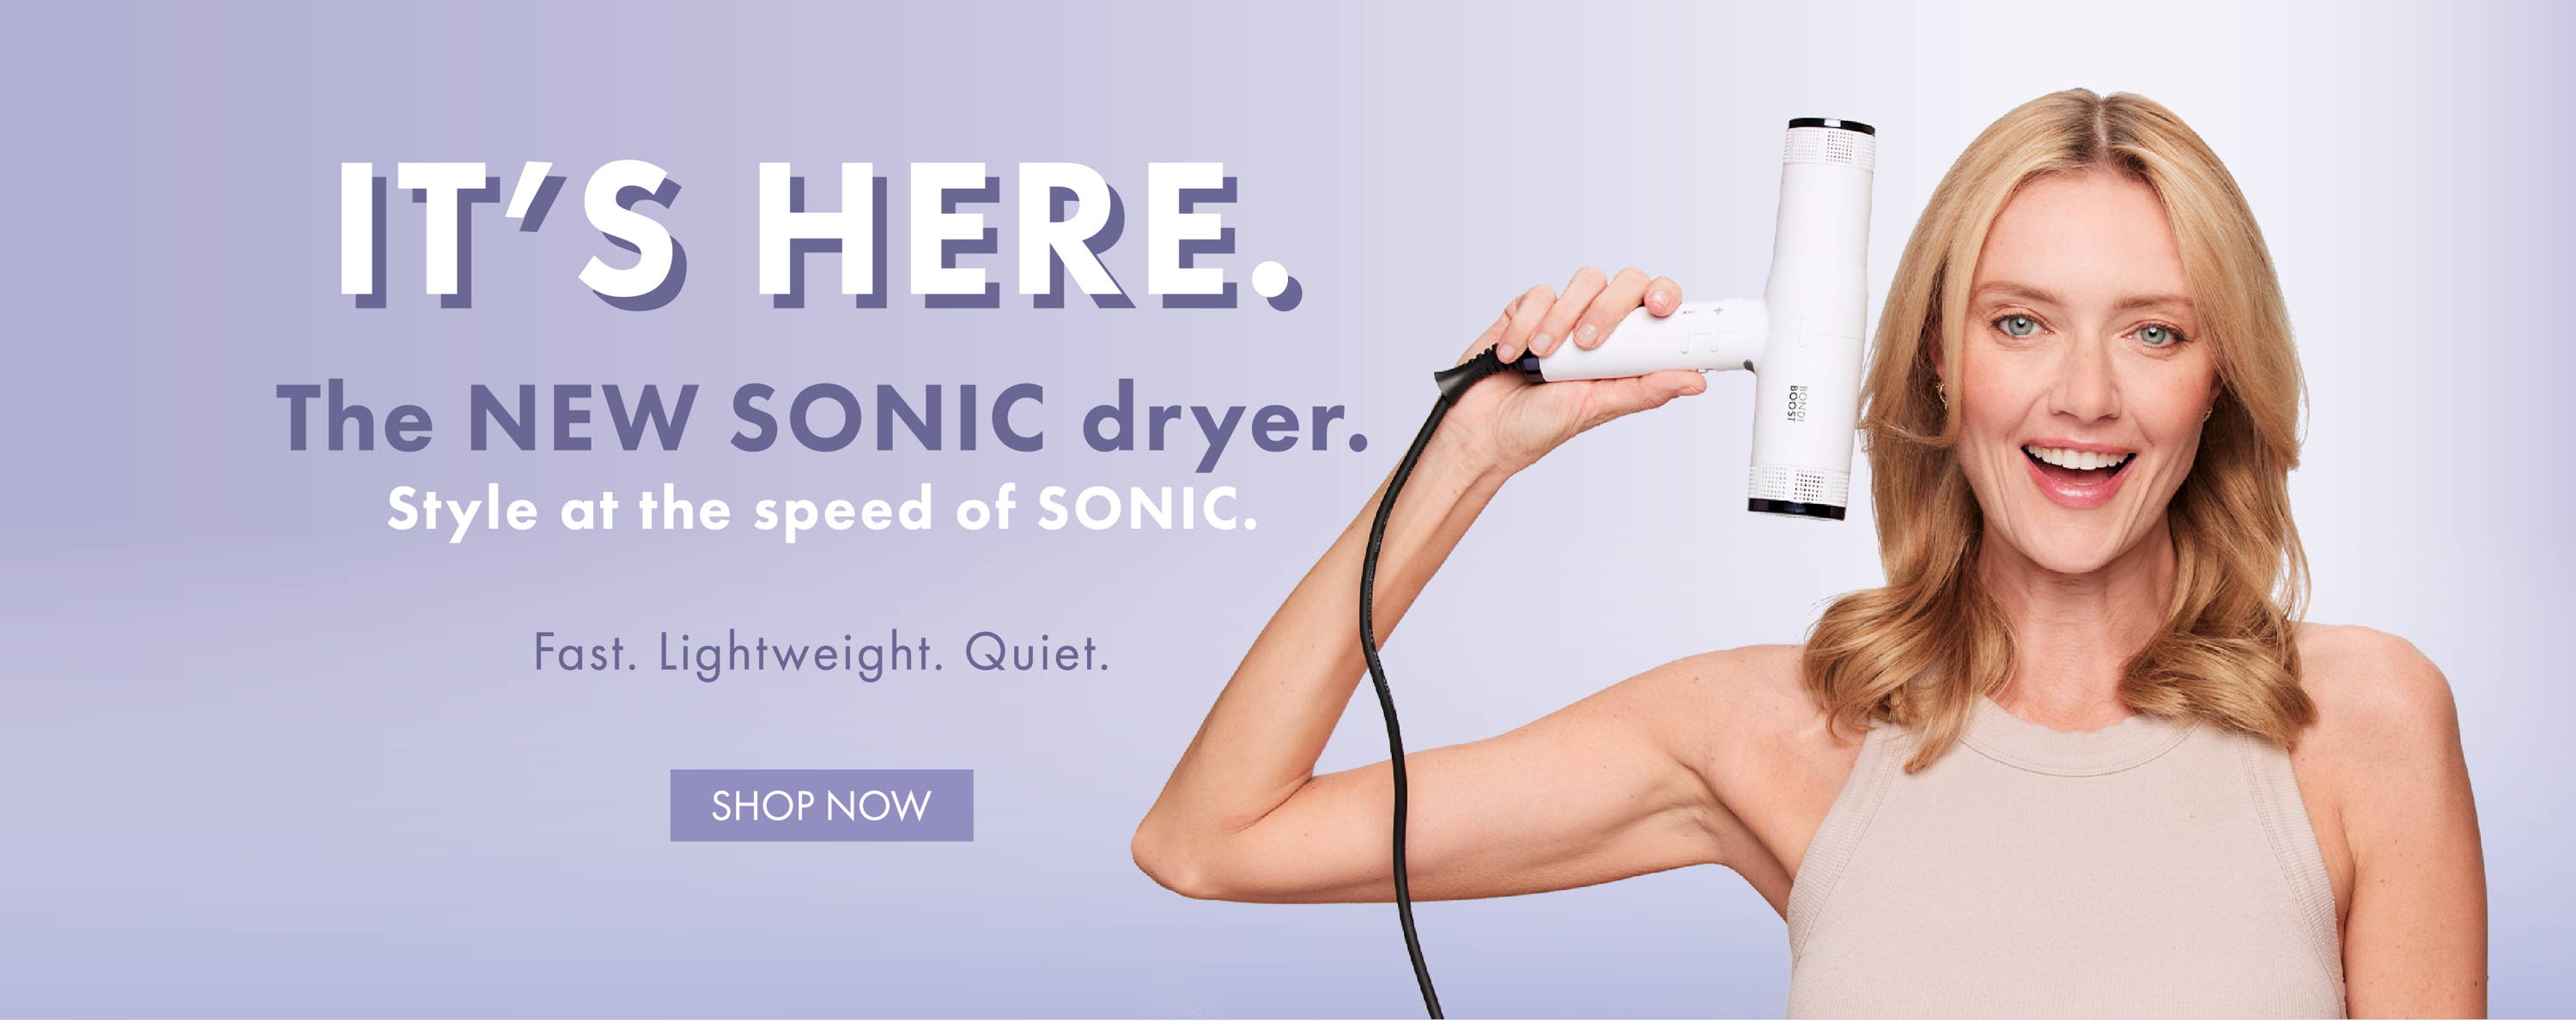 New Sonic Dryer. Style at the Speed of Sonic. Fast. Lightweight. Quiet. 